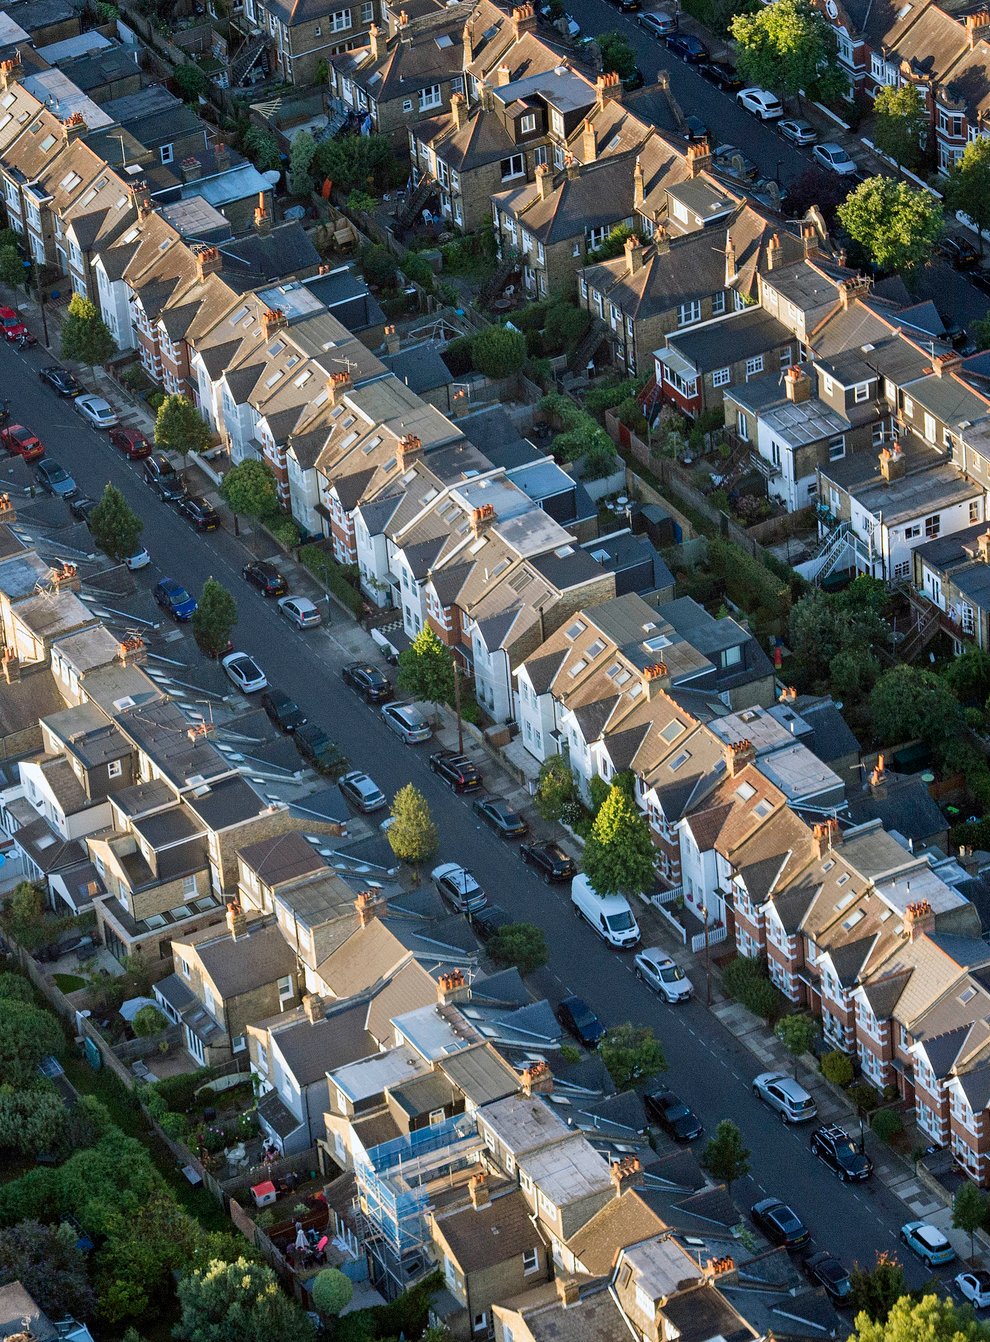 The average UK house price slipped back in July from a record high the previous month, marking the first month-on-month dip since June last year, according to Halifax (Victoria Jones/PA)